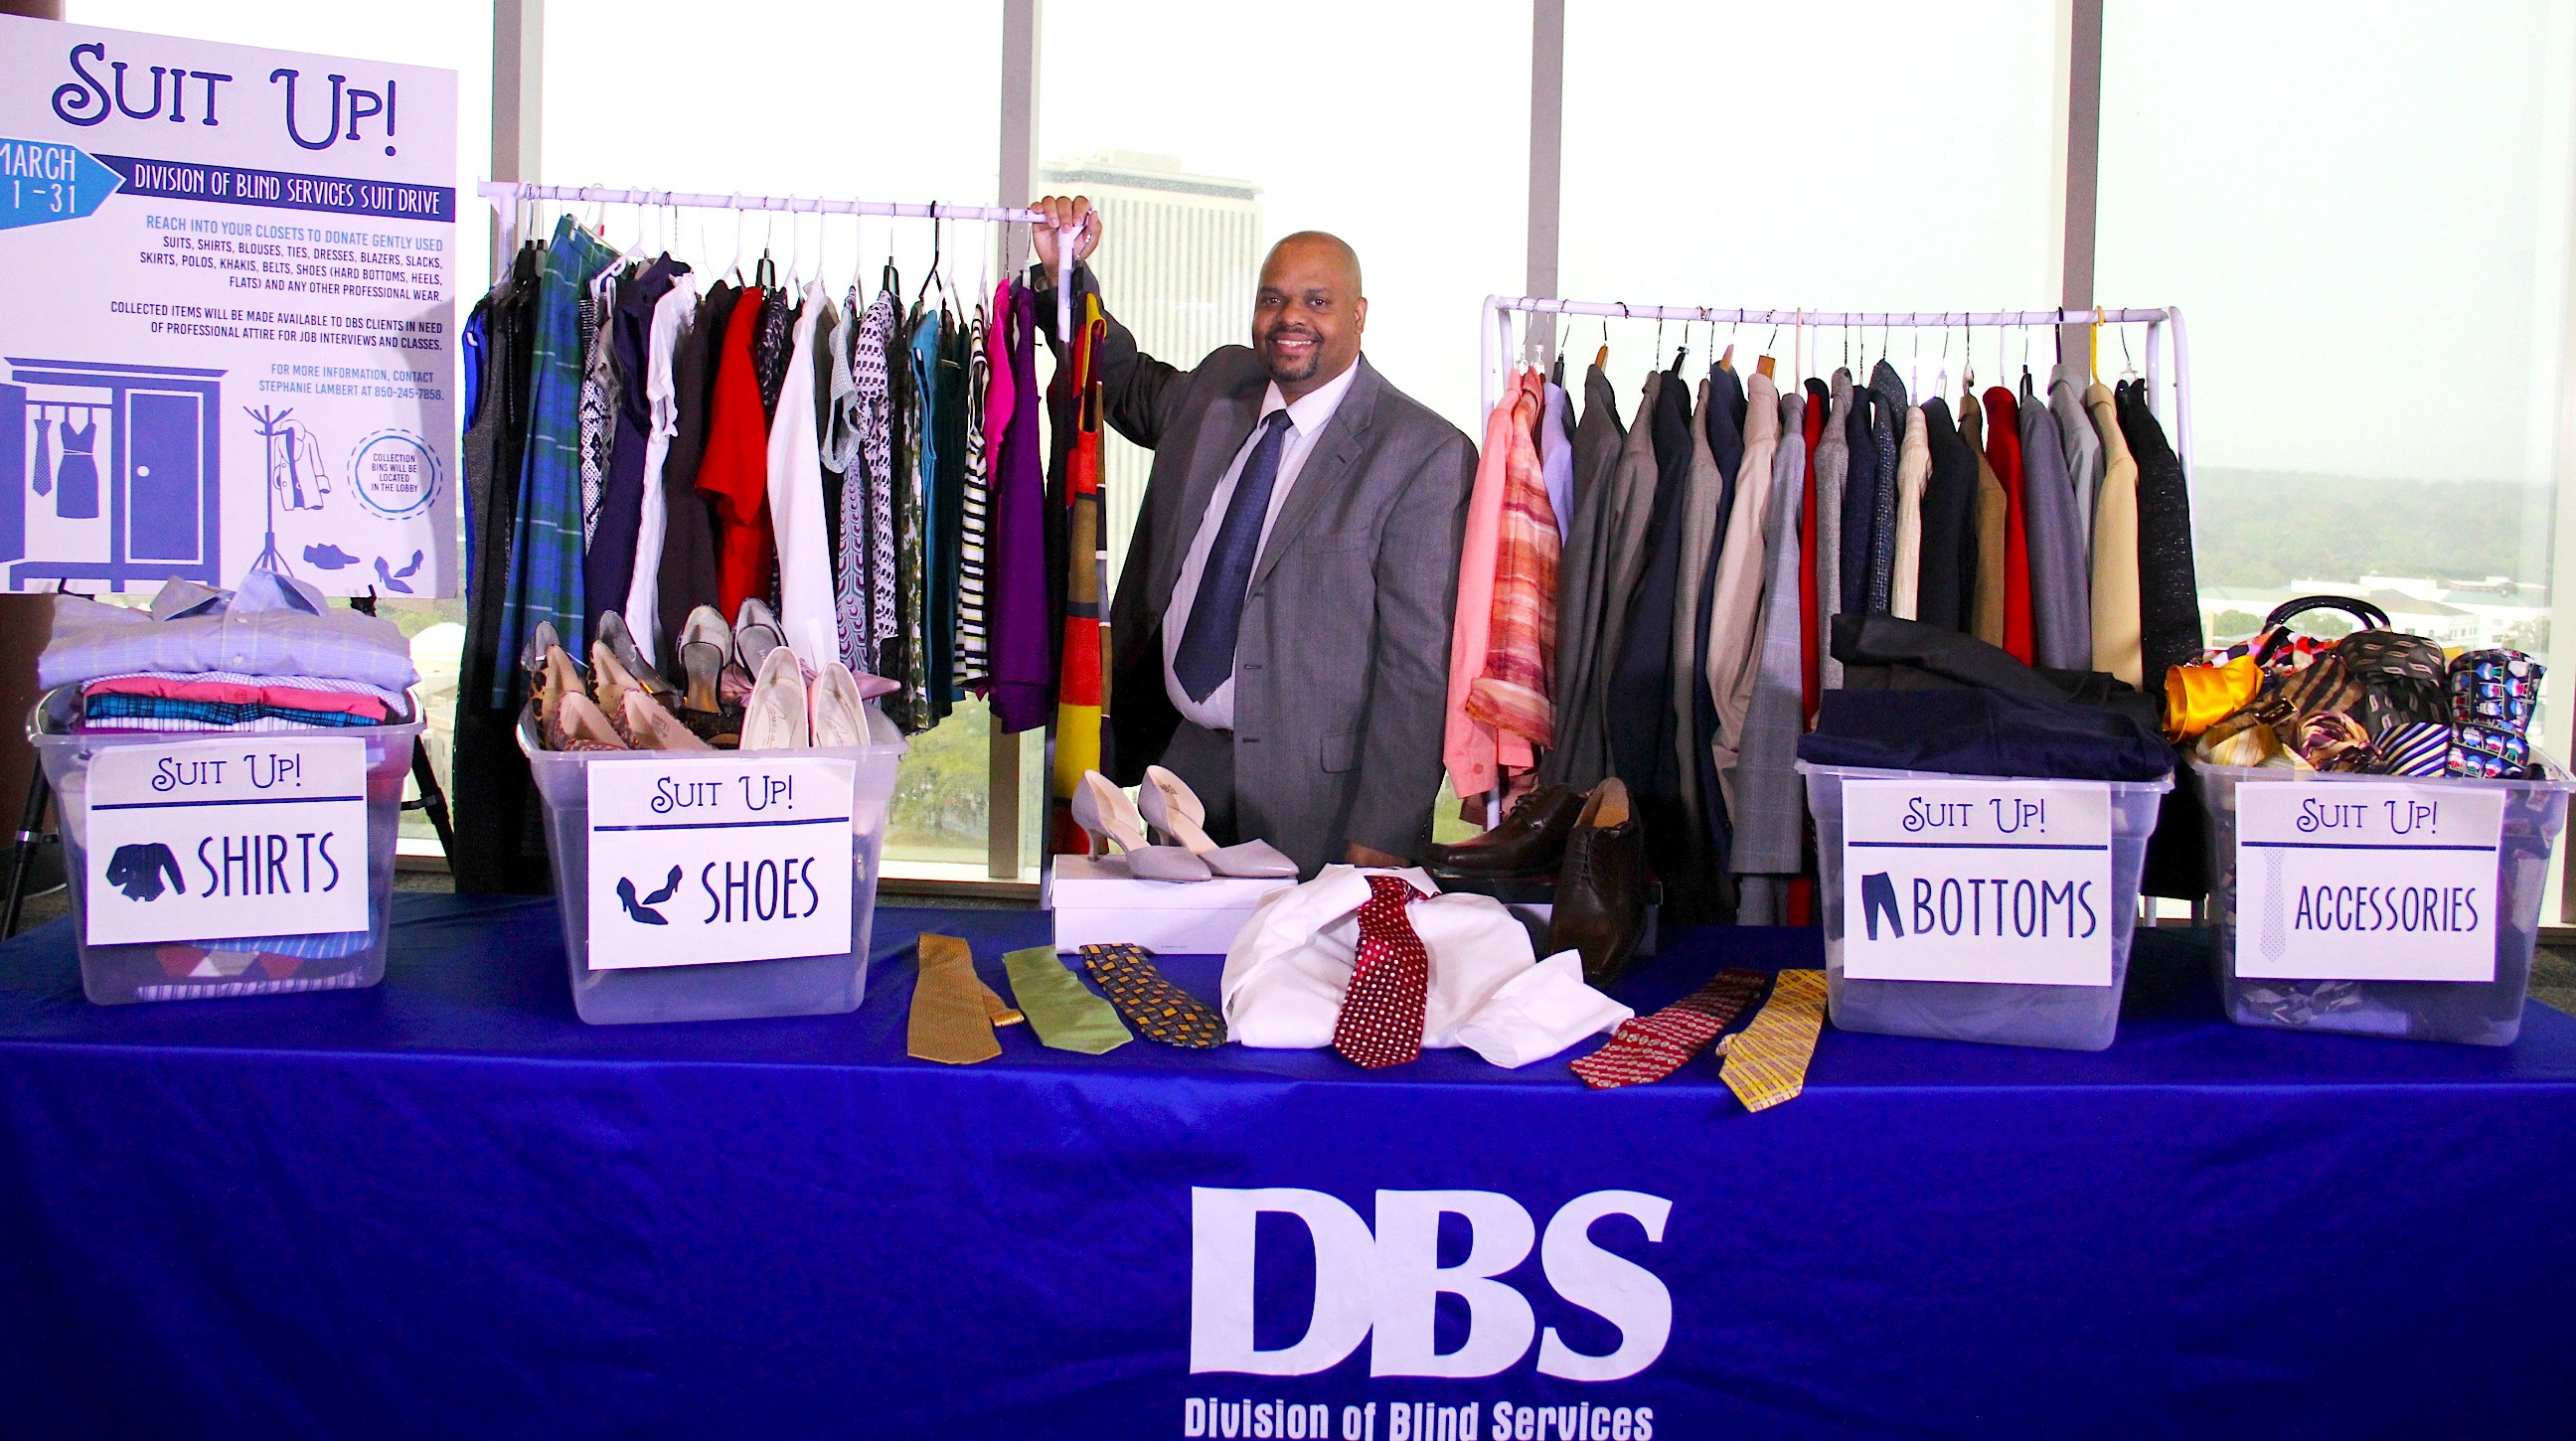 Florida Division of Blind Services Director Robert L. Doyle III standing with a few of the donated items